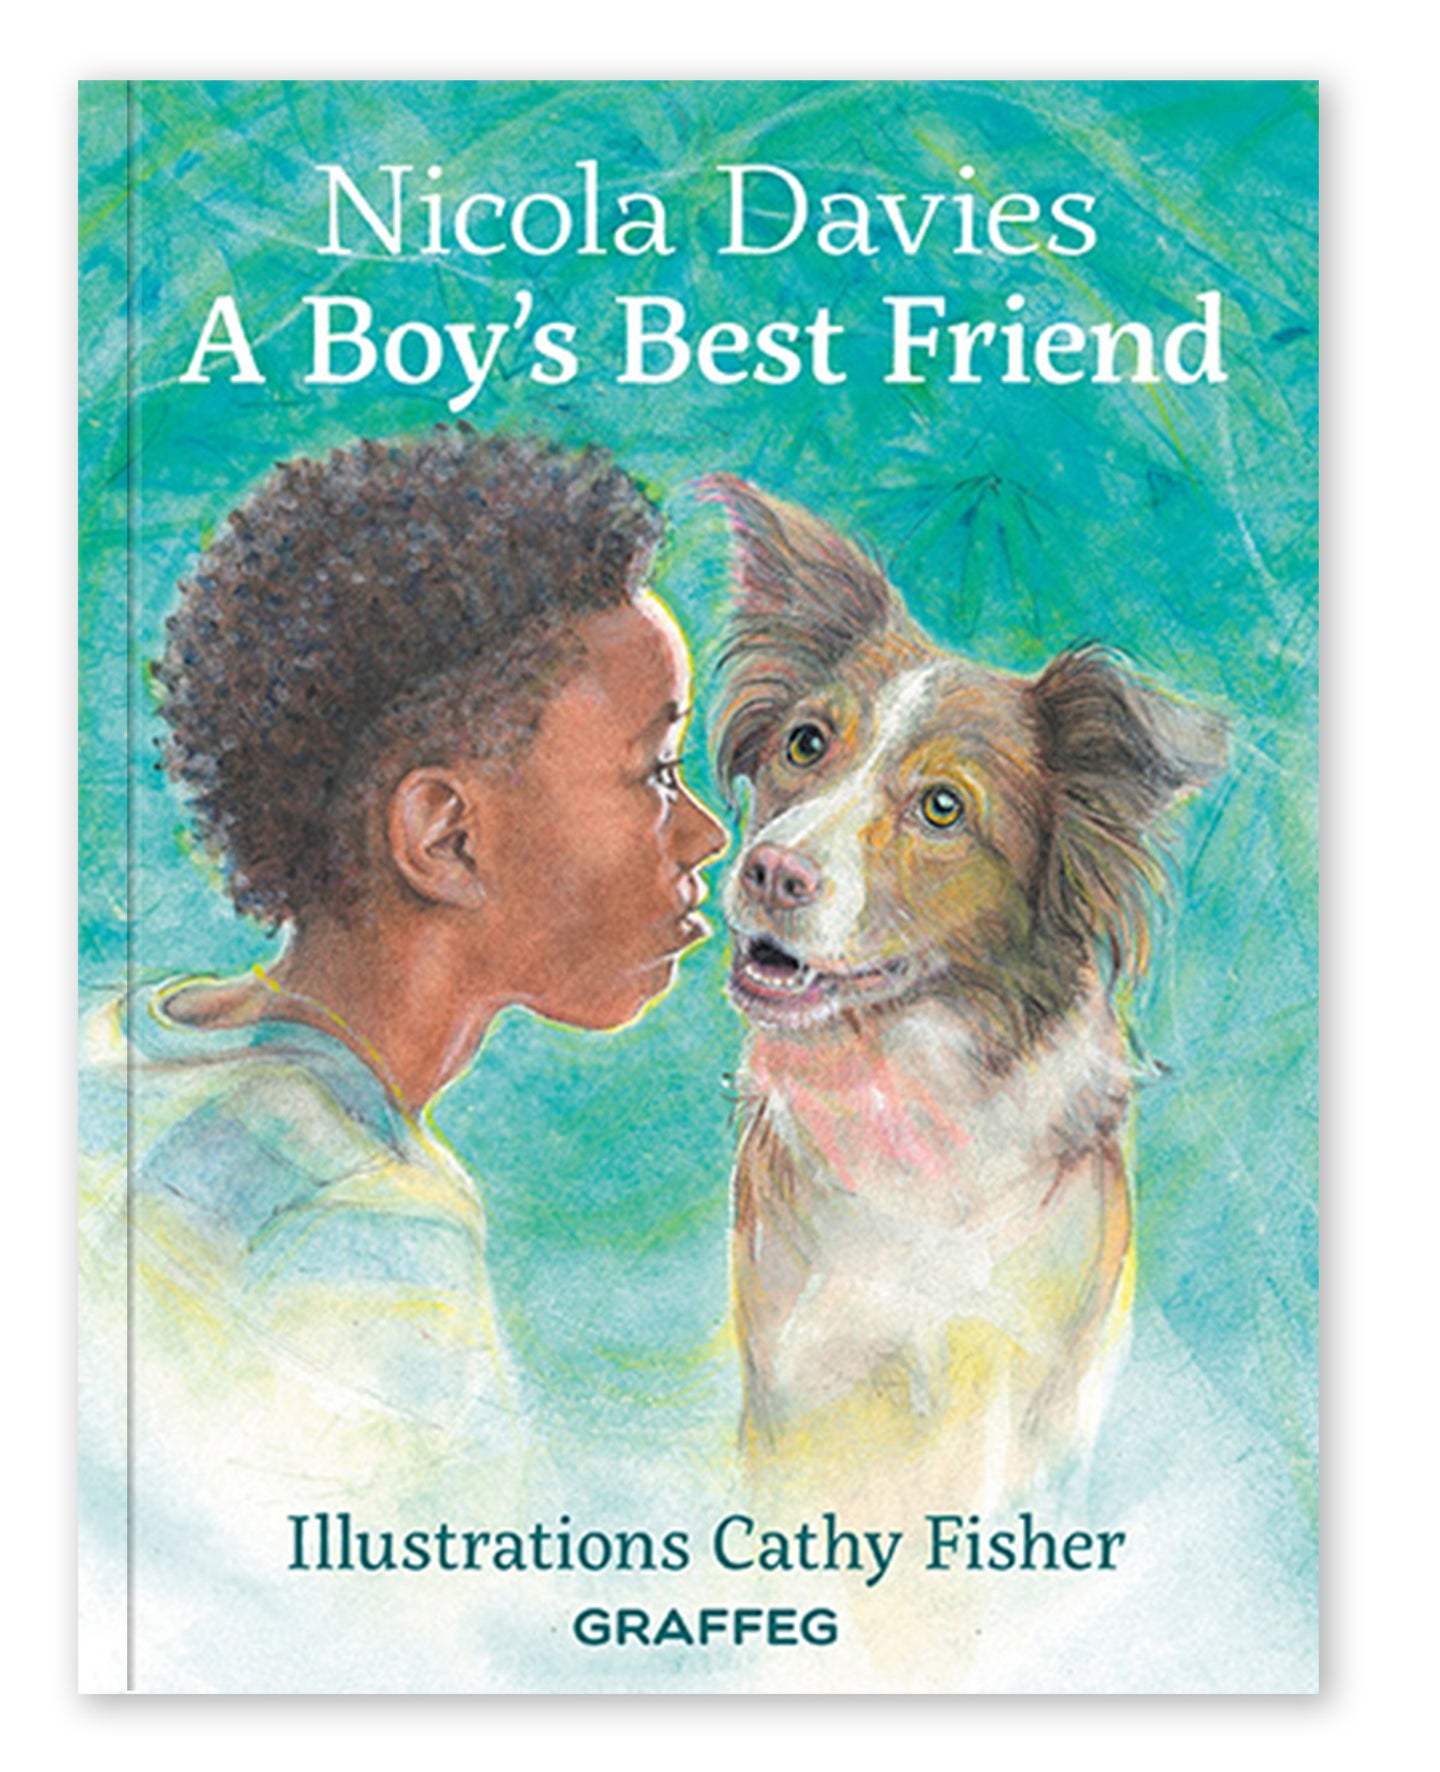 A Boy’s Best Friend by Nicola Davies and Cathy Fisher published by Graffeg Country Tales